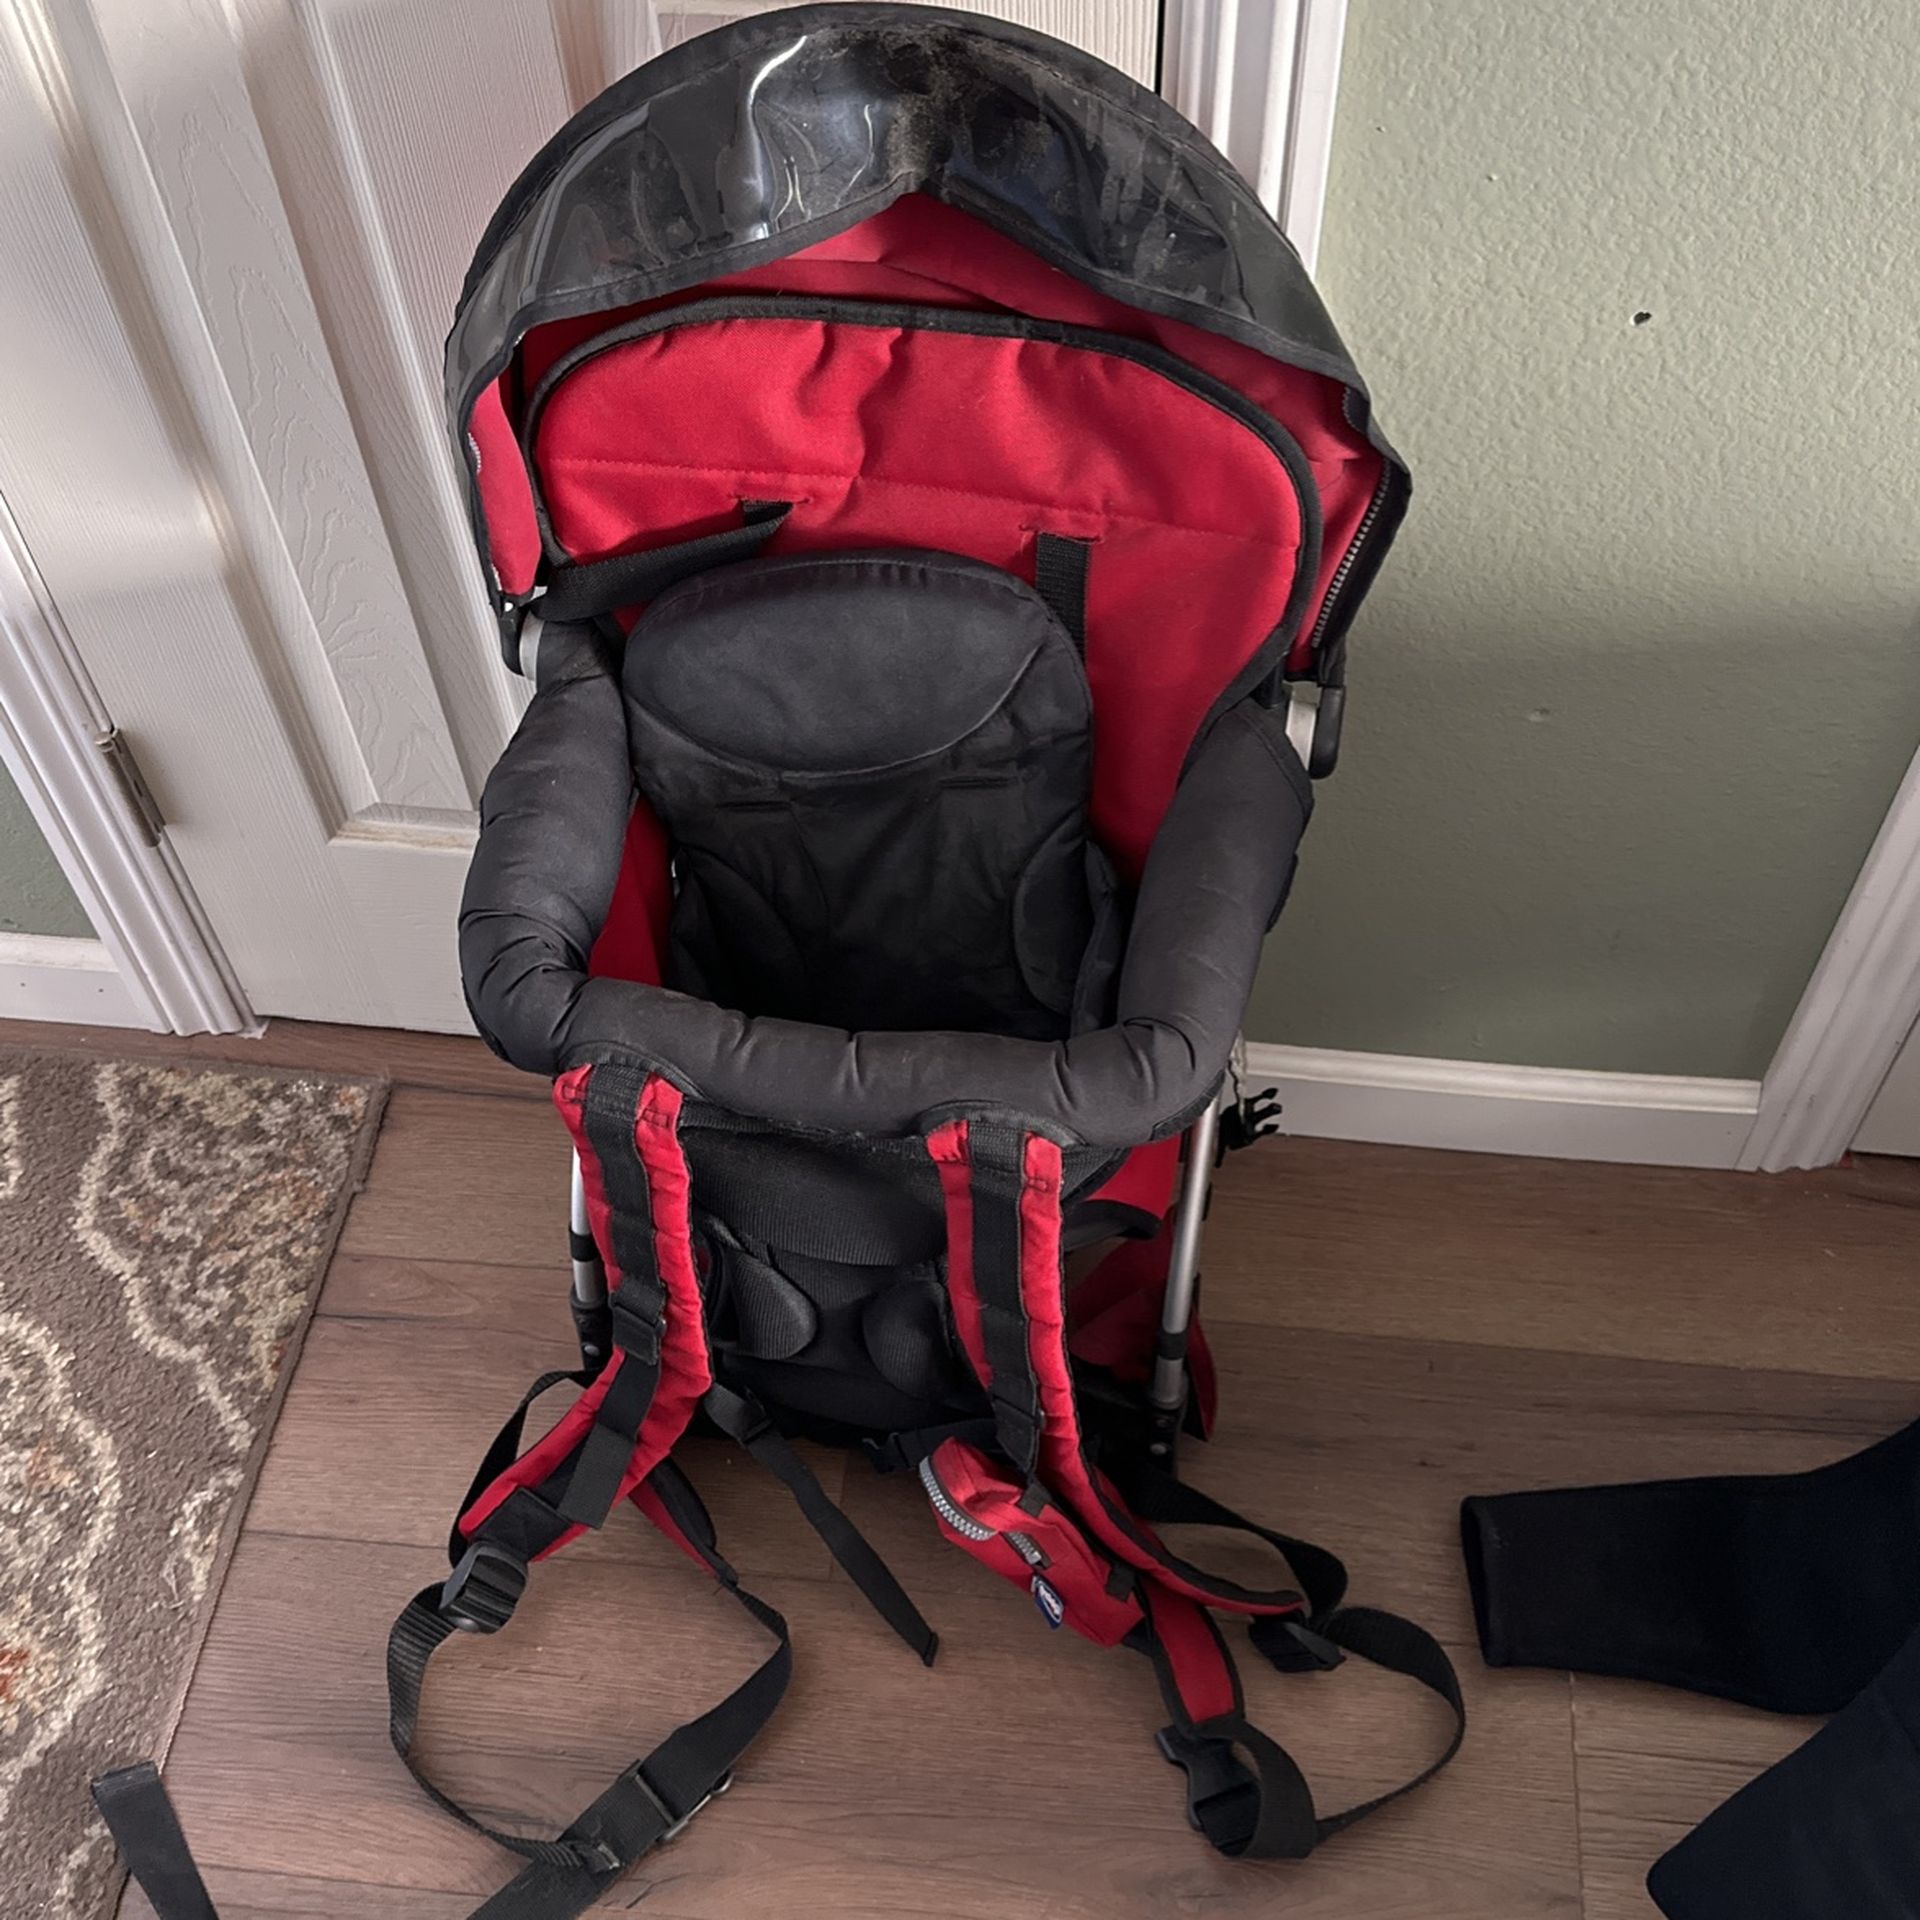 Back Pack Child Carrier Free